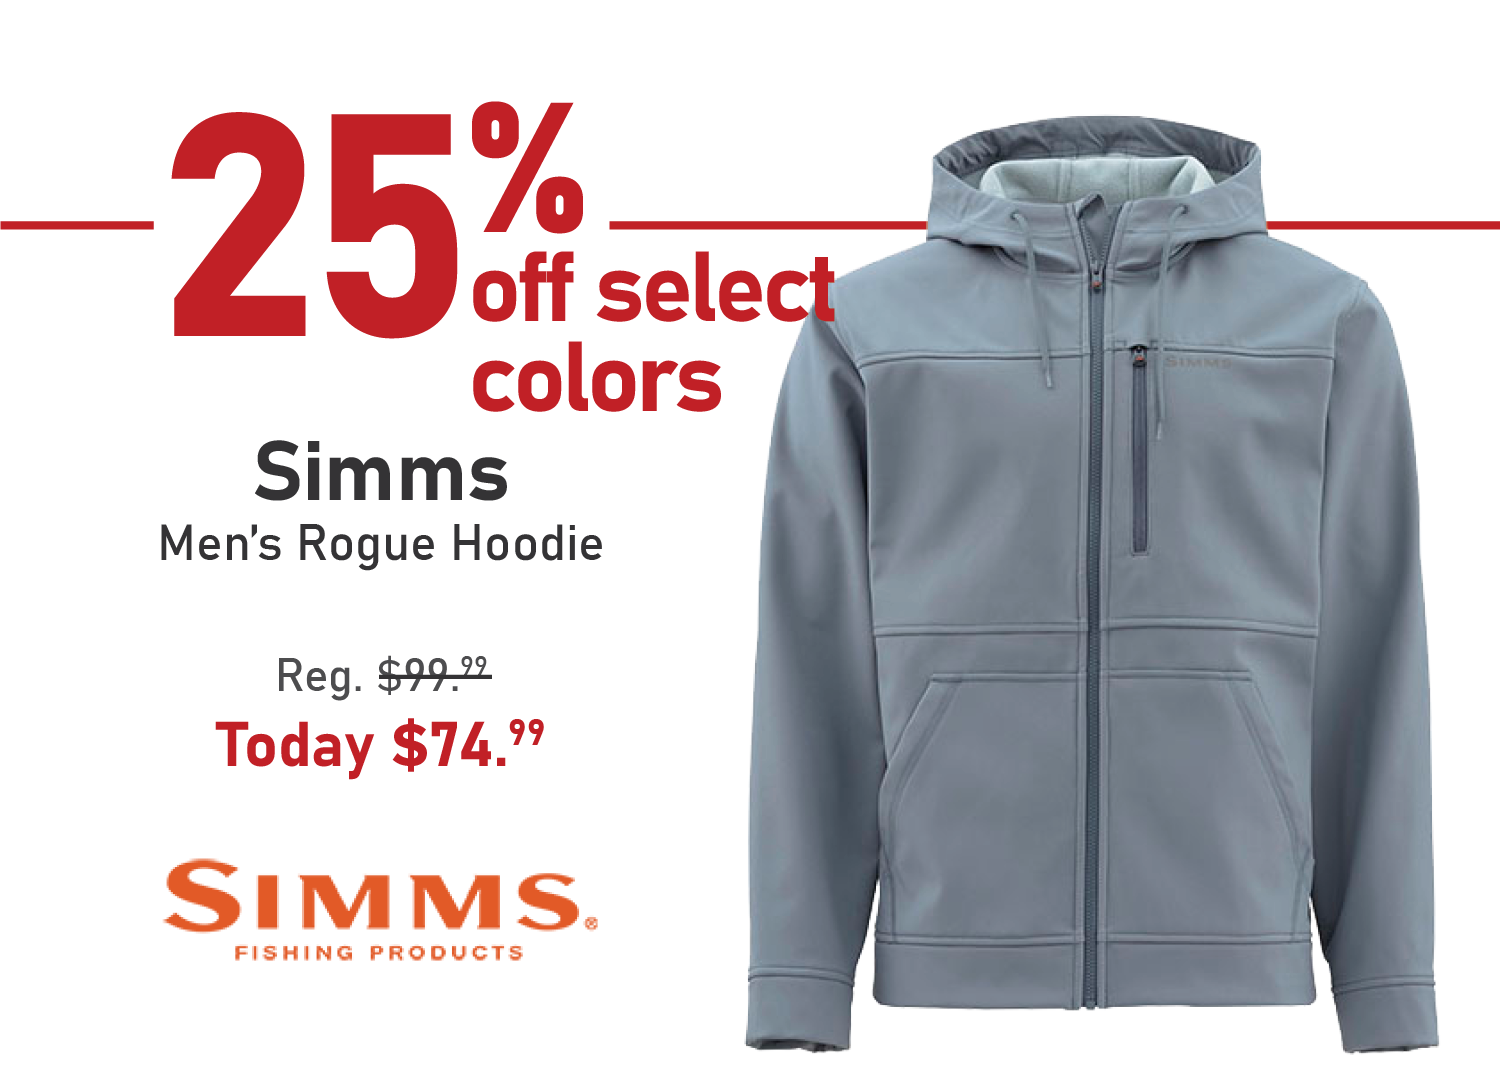 Save 25% off on the Simms Men's Rogue Hoodie